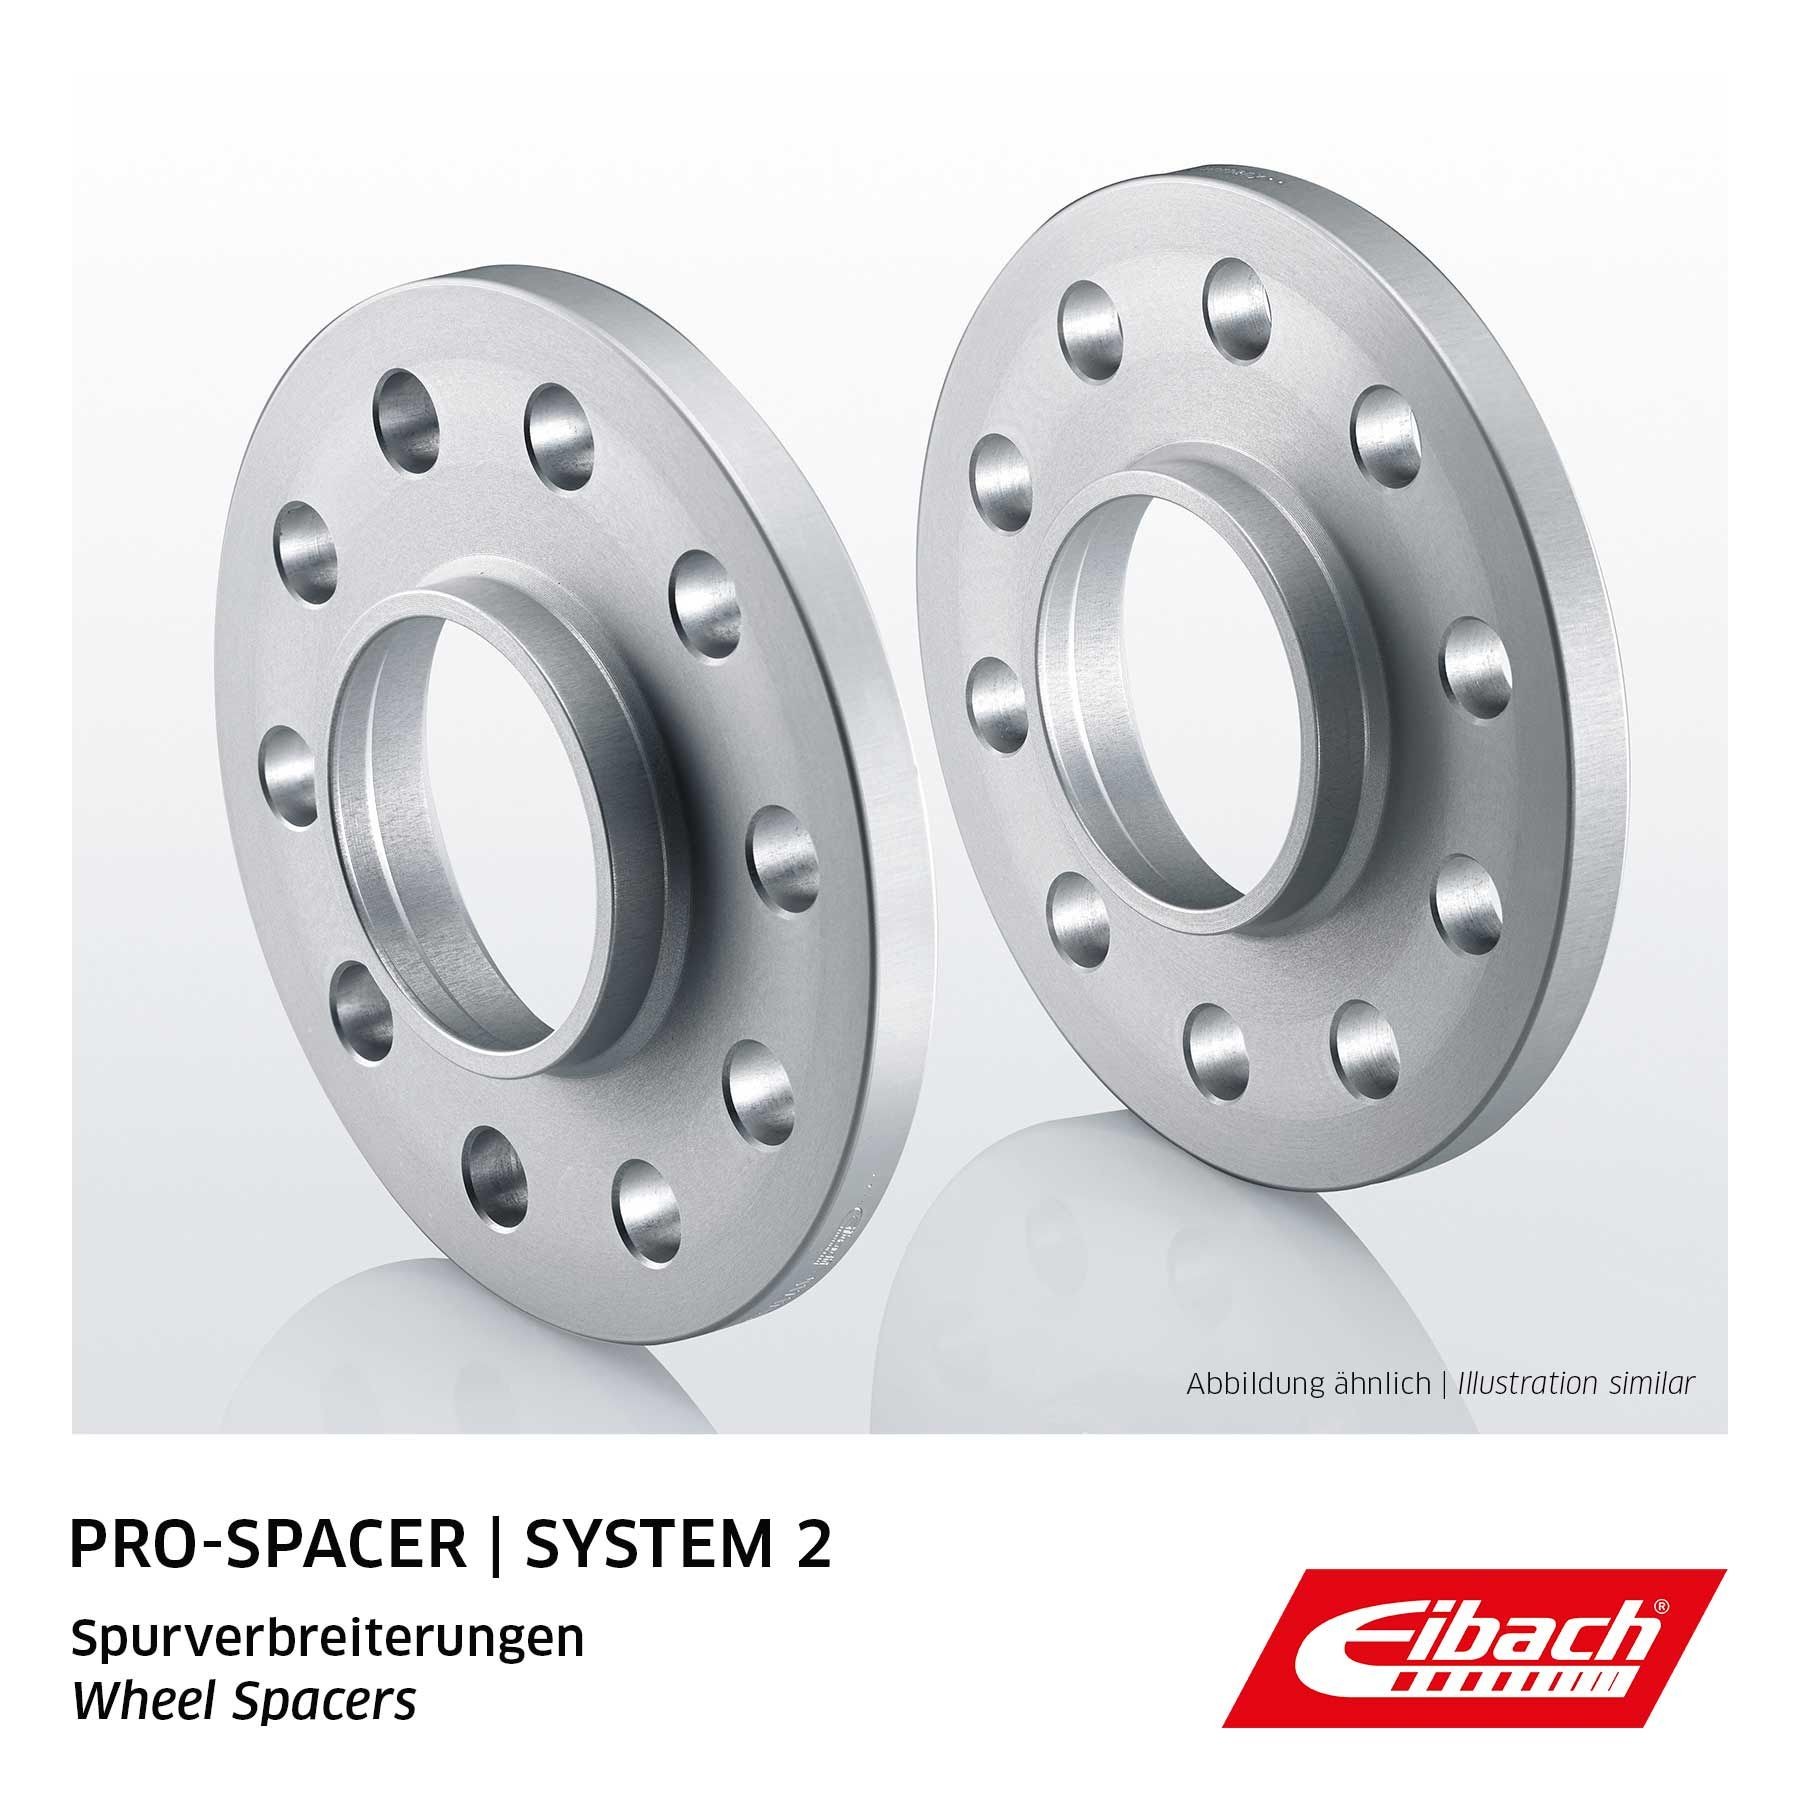 Opel Wheel spacer EIBACH S90-2-16-001 at a good price